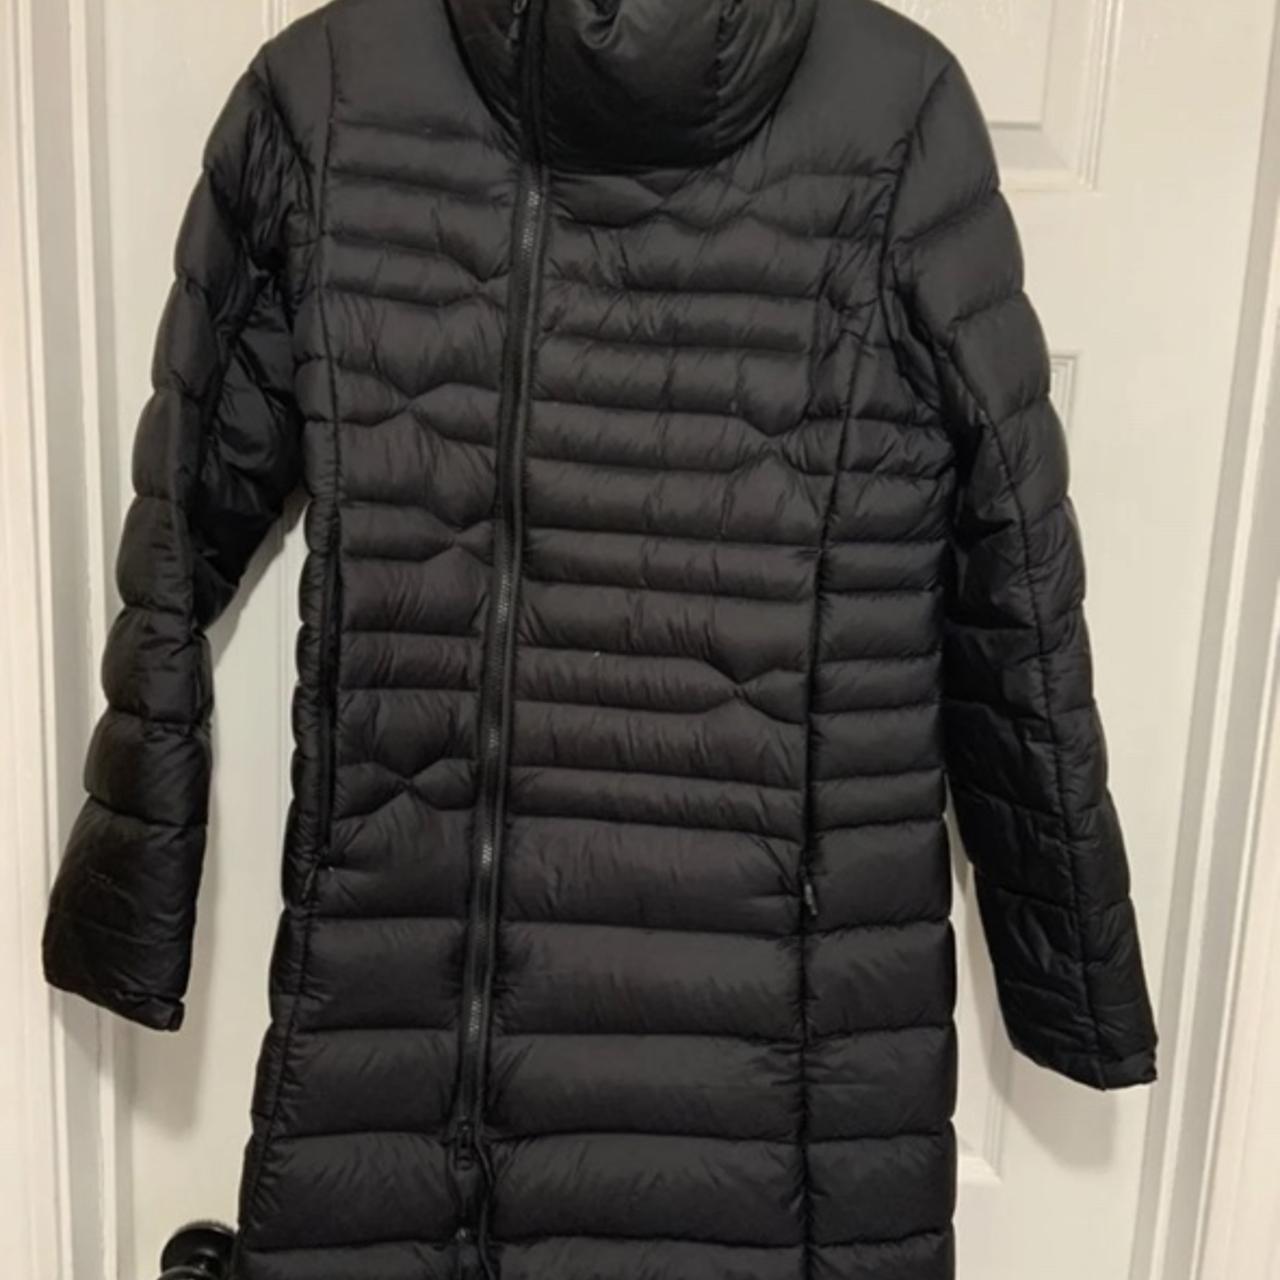 The north face northern parka size small. Some... - Depop